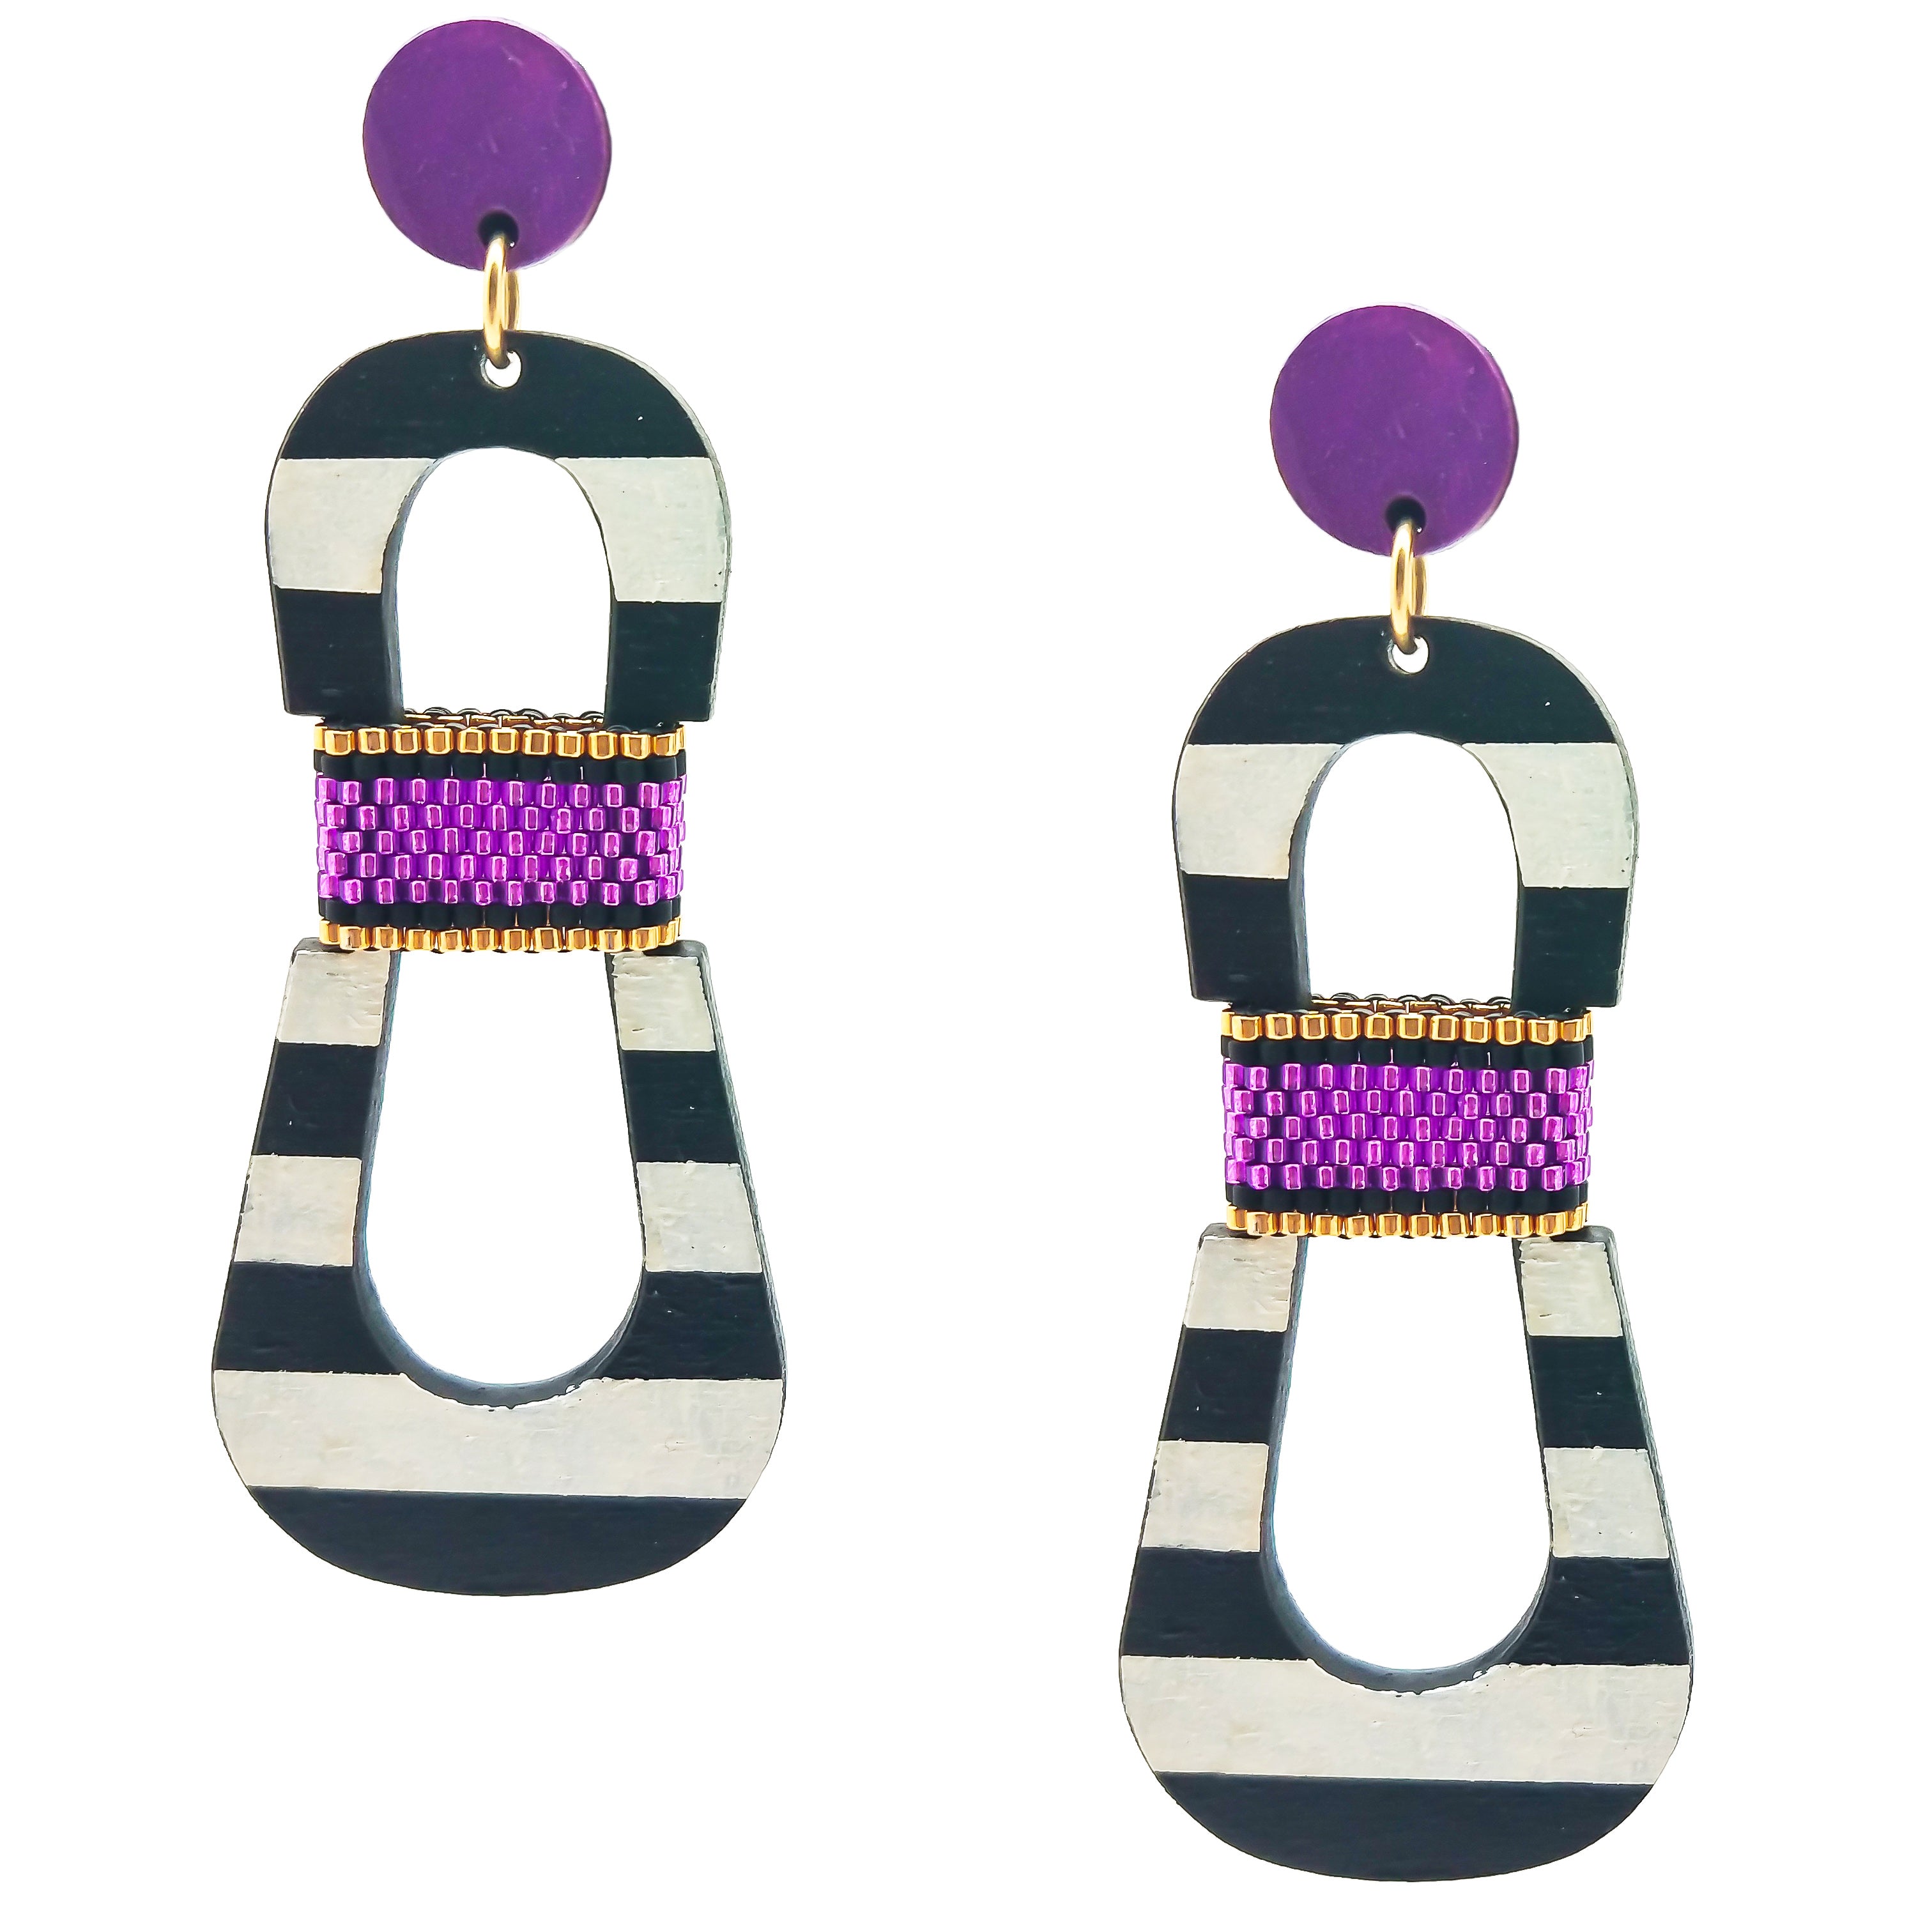 Modern, curvy, black and white striped statement earrings with hand-beaded purple accents by the brand SCOTCHBONNET.